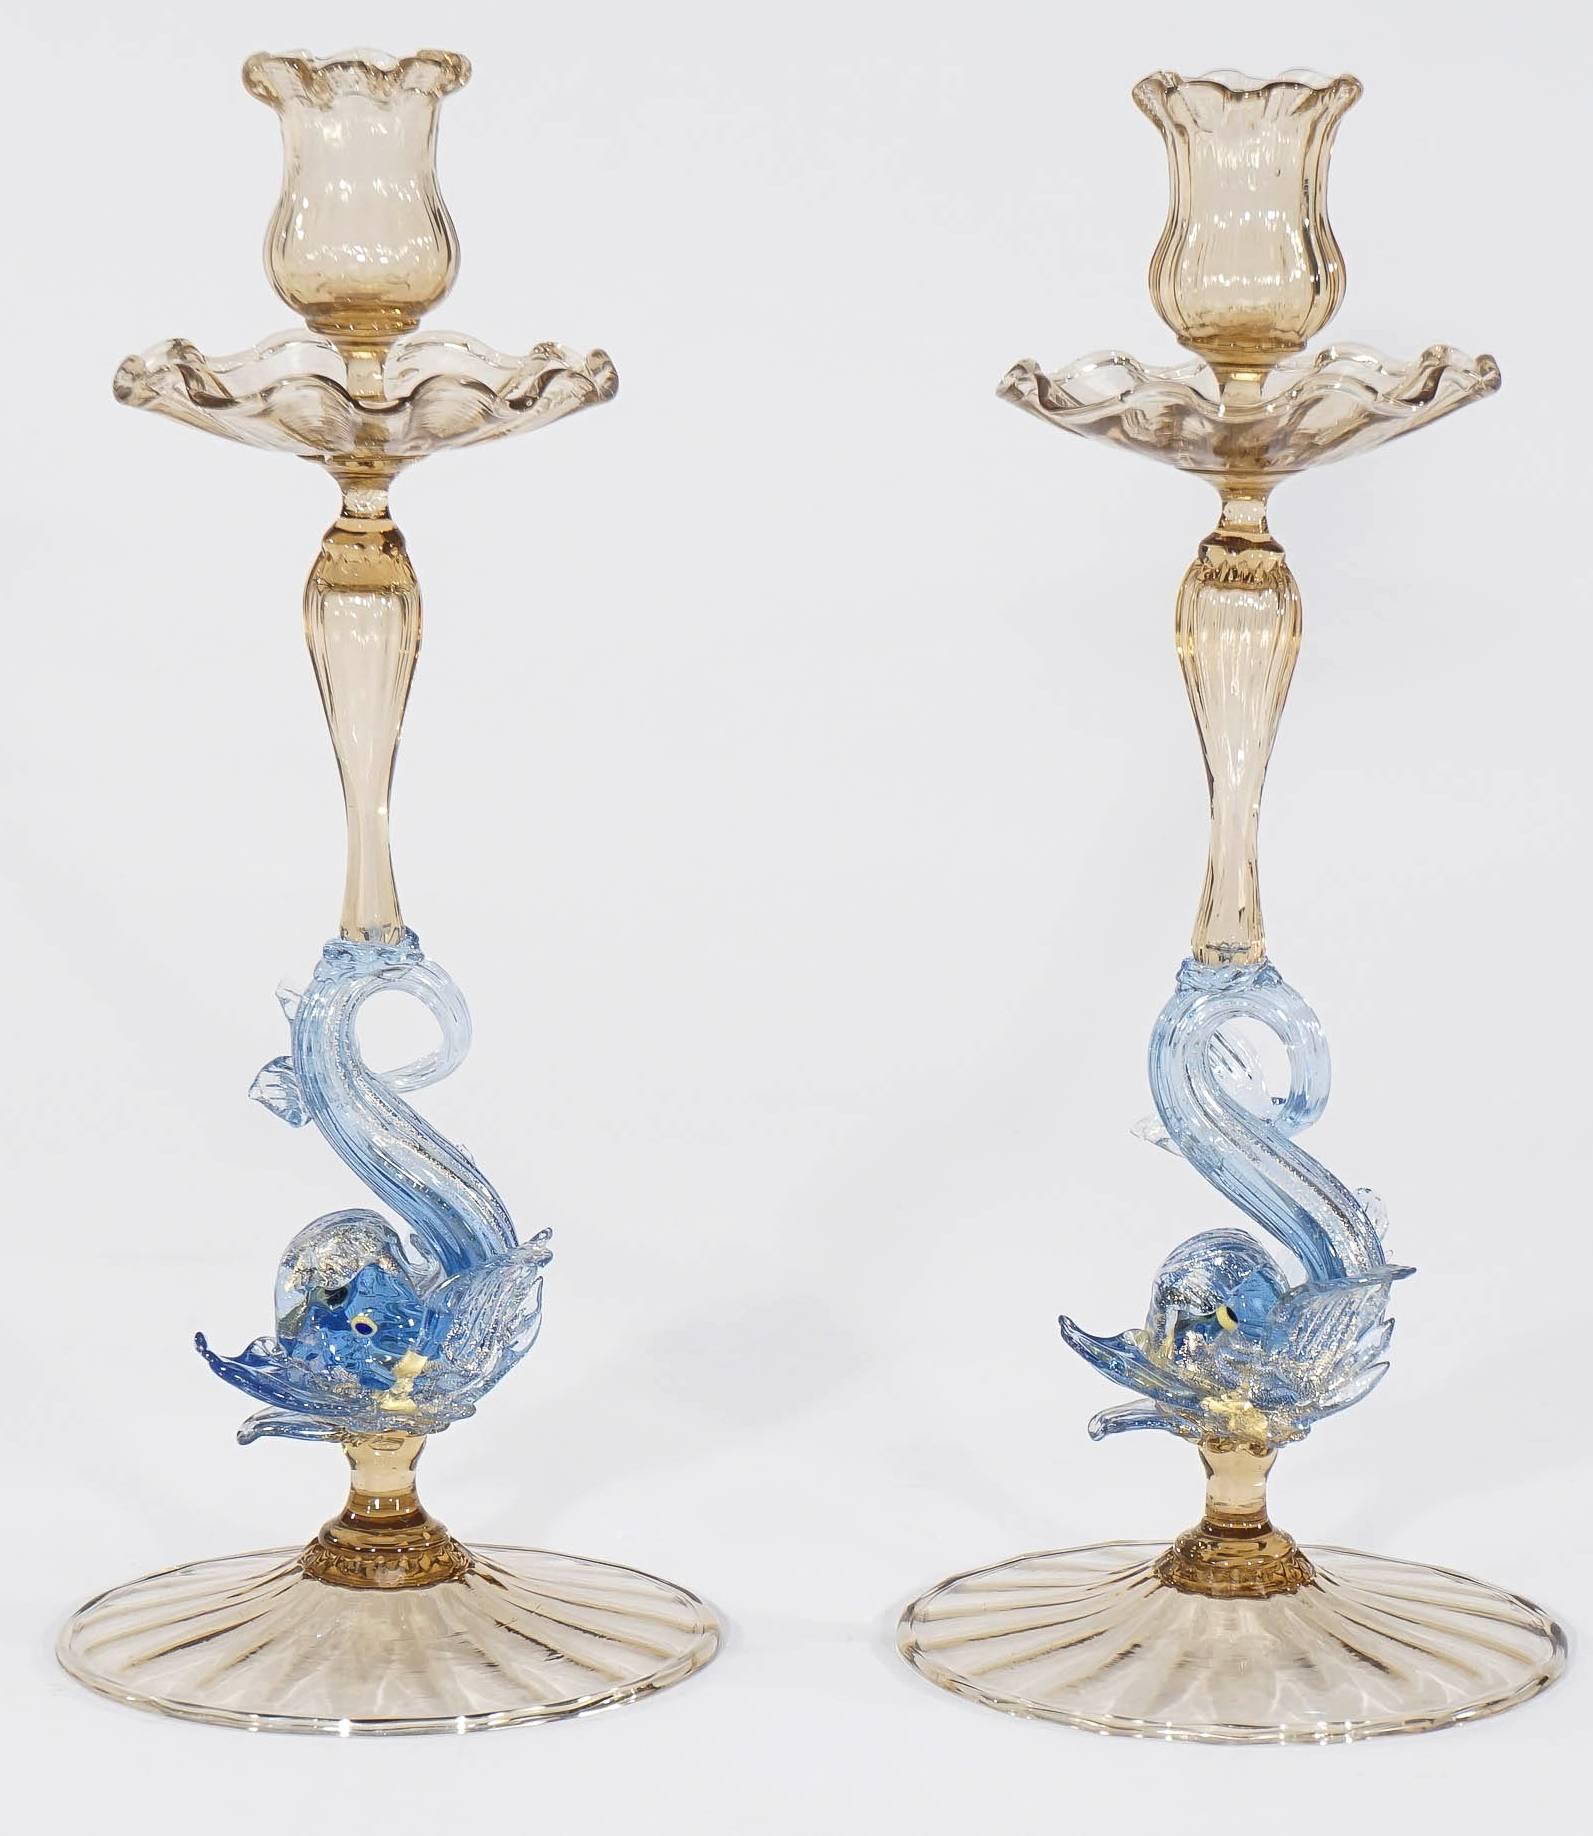 This is a whimsical and beautifully articulated pair of handblown candlesticks made by Salviati, circa 1920s. The combination of Topaz and French Blue works well with many palettes and also provides a lovely display or addition to a collection. The